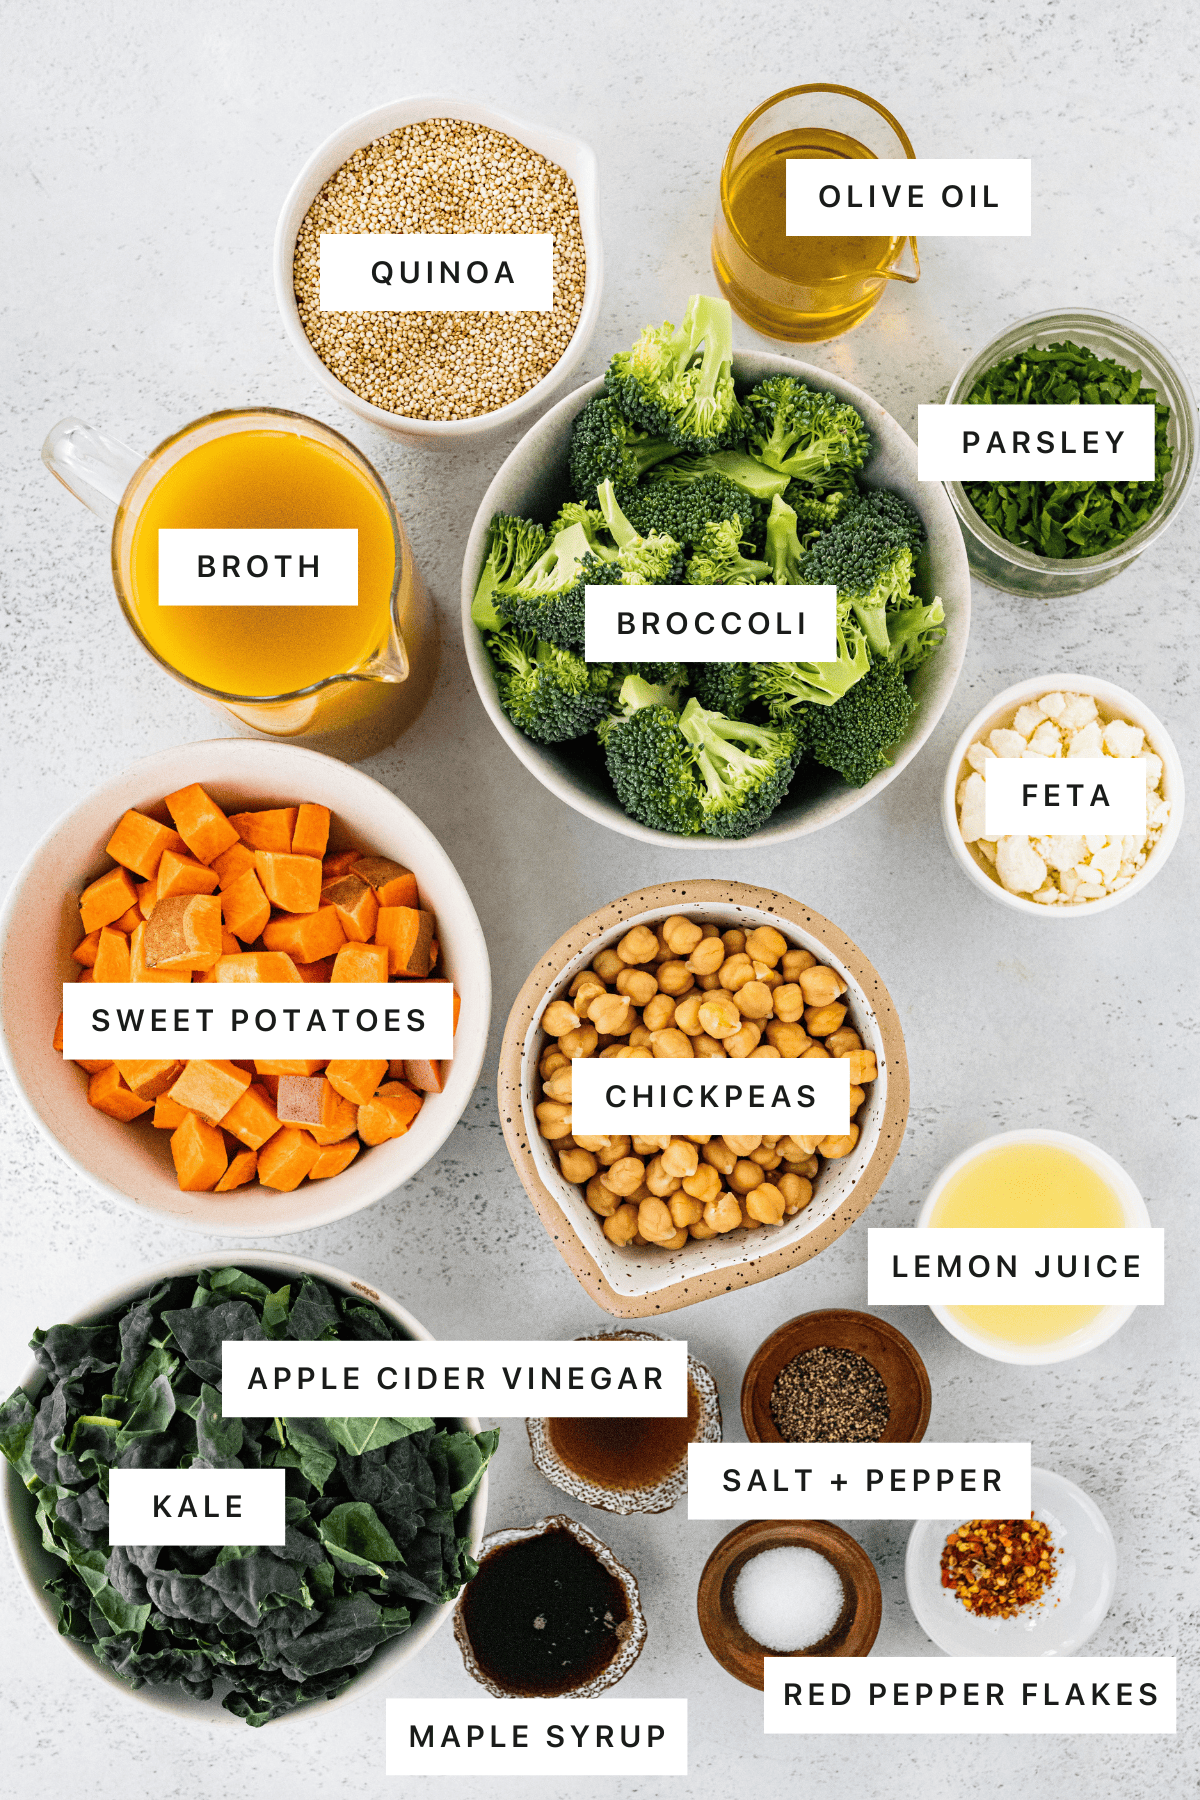 Ingredients measured out to make Roasted Broccoli Quinoa Salad: quinoa, olive oil, parsley, broth, broccoli, feta, sweet potatoes, chickpeas, lemon juice, apple cider vinegar, kale, salt, pepper, maple syrup and red pepper flakes.